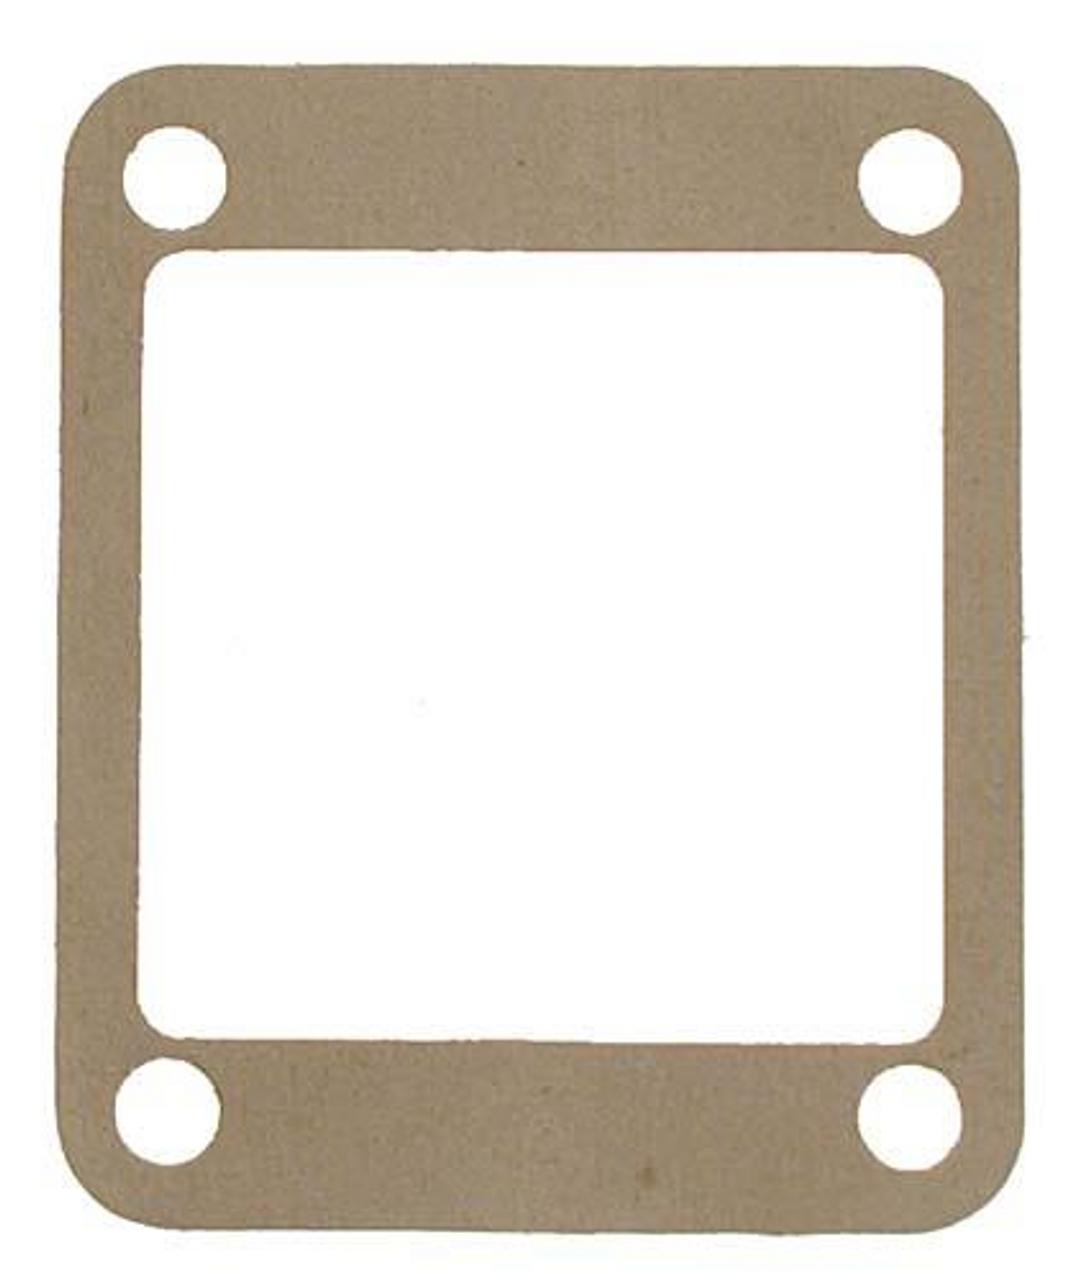 E-Z-GO Gas 2-Cycle Reed Valve Gasket (Years 1989-1993), 4777, 24509G1